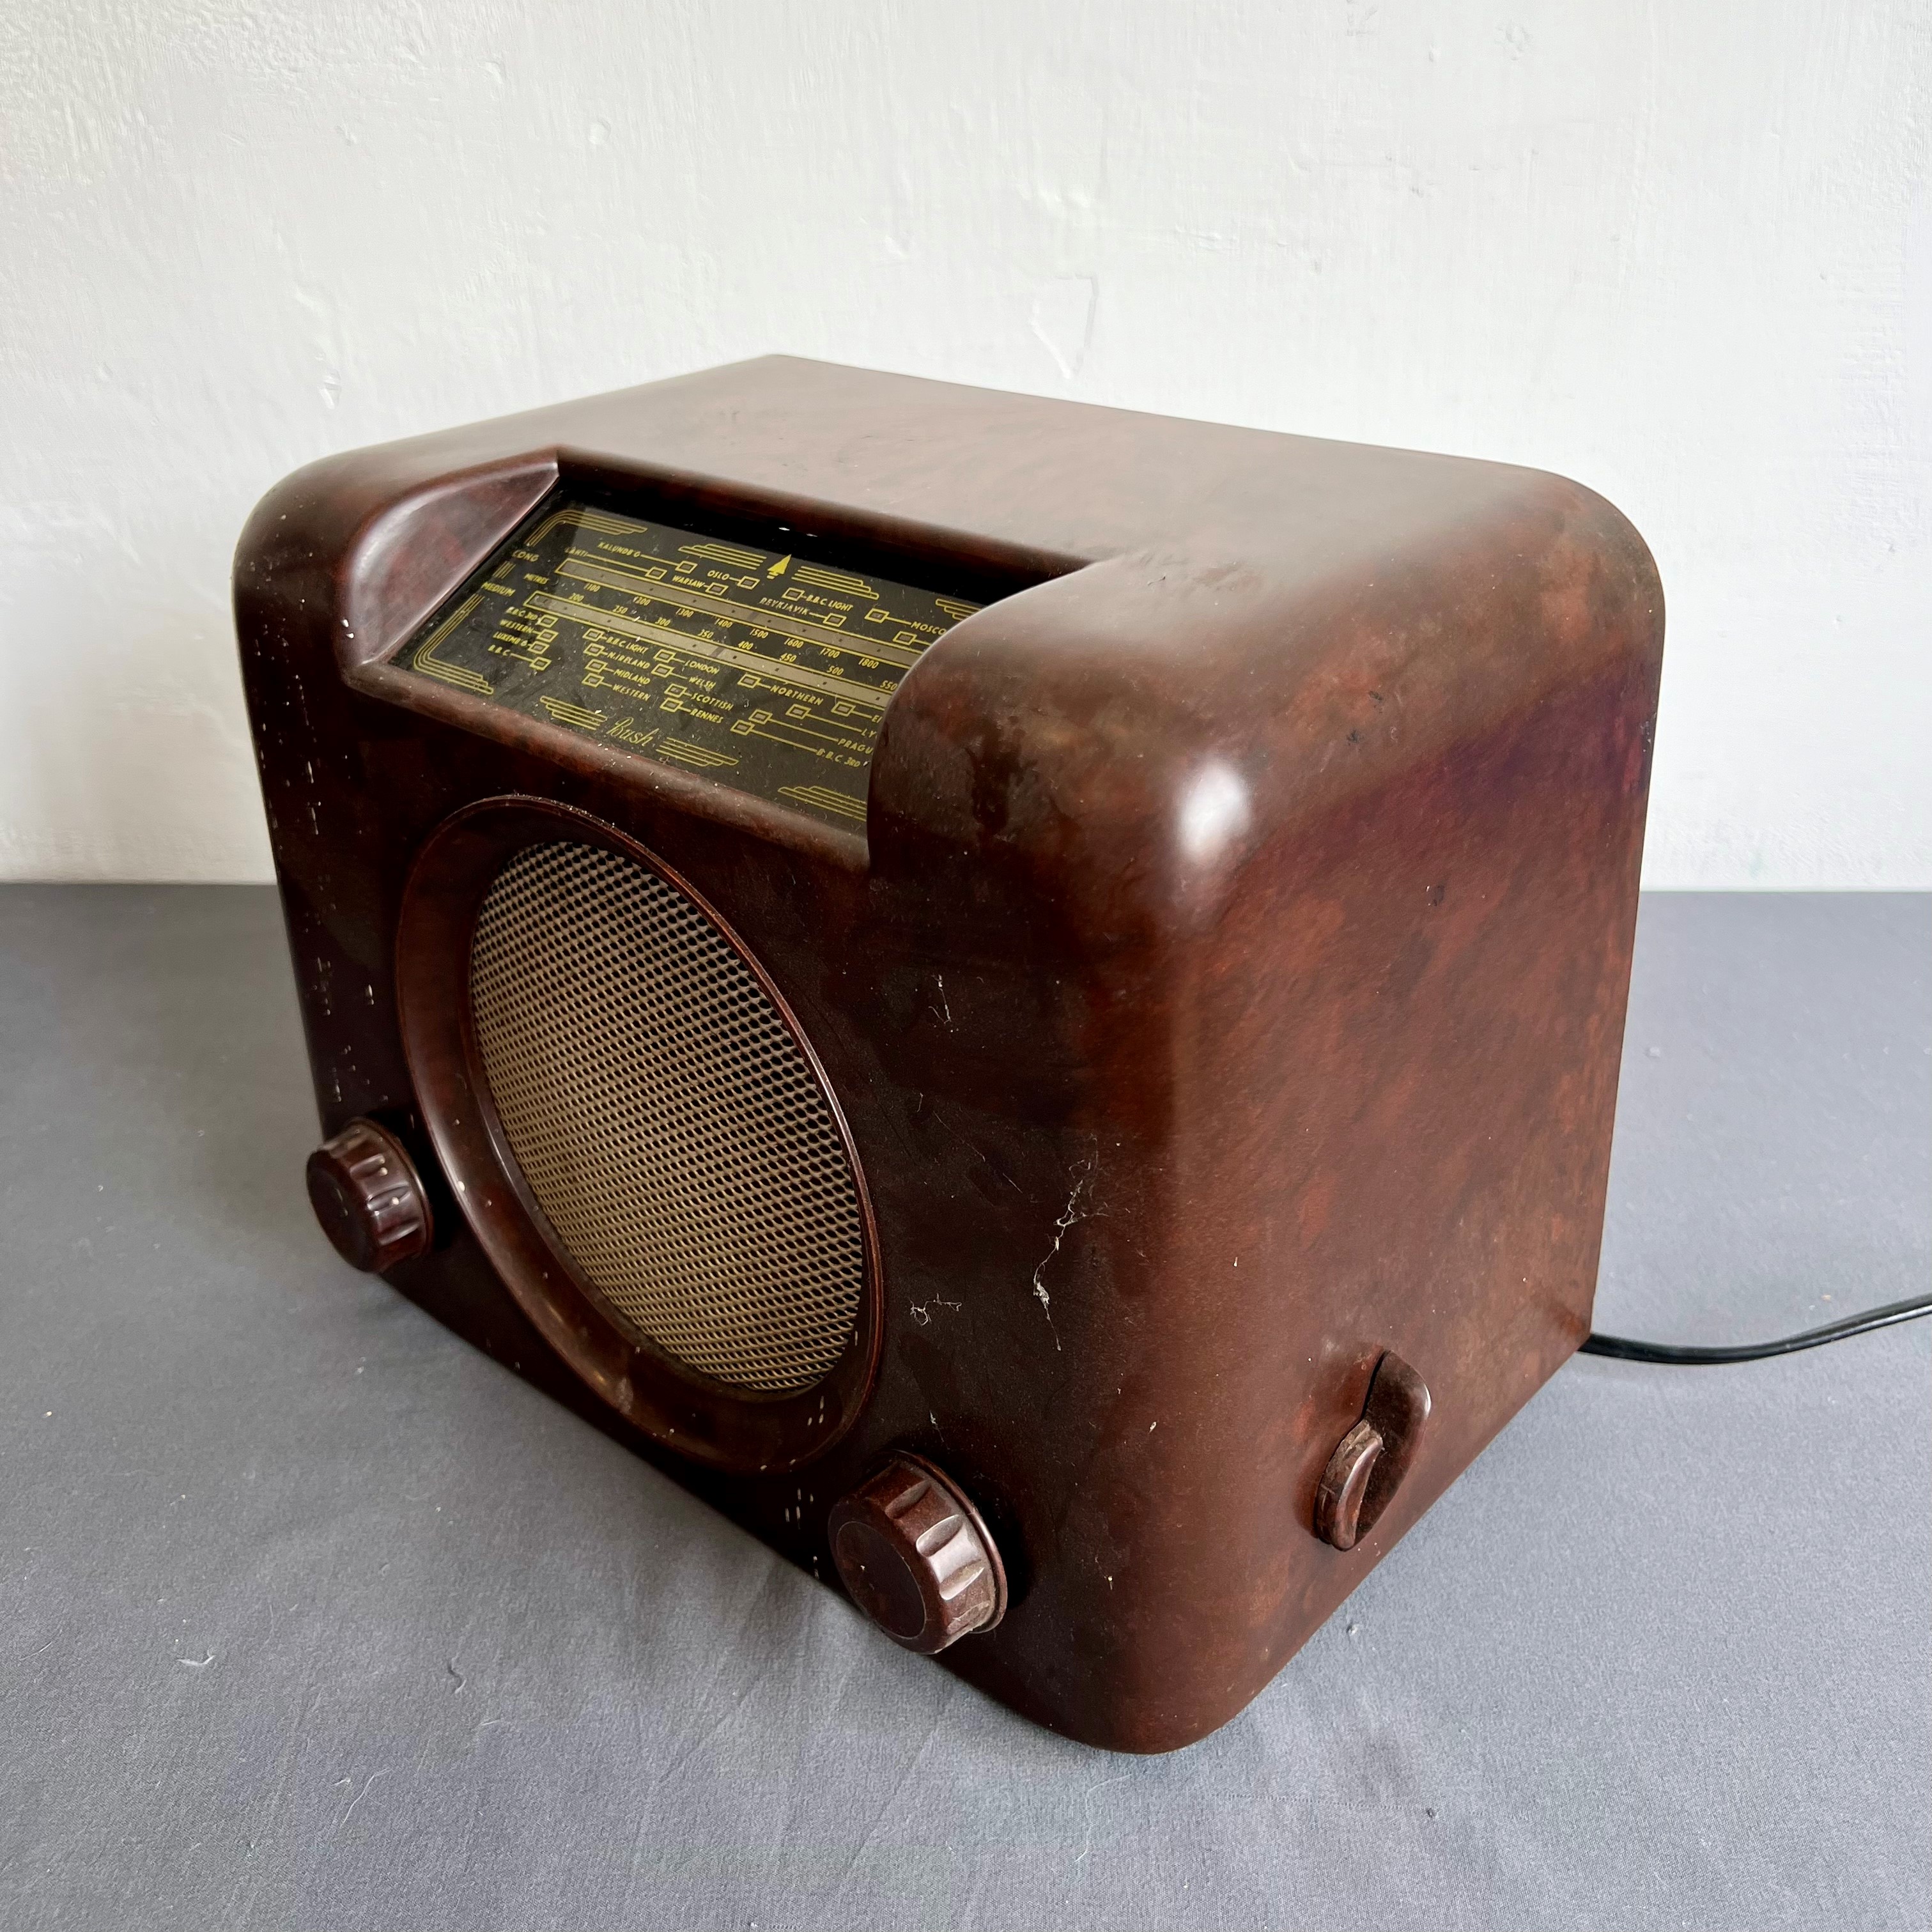 Two Bush bakelite radios - 1950s, comprising a DAC 90A and a DAC 10, both with brown bakelite cases, - Image 8 of 8